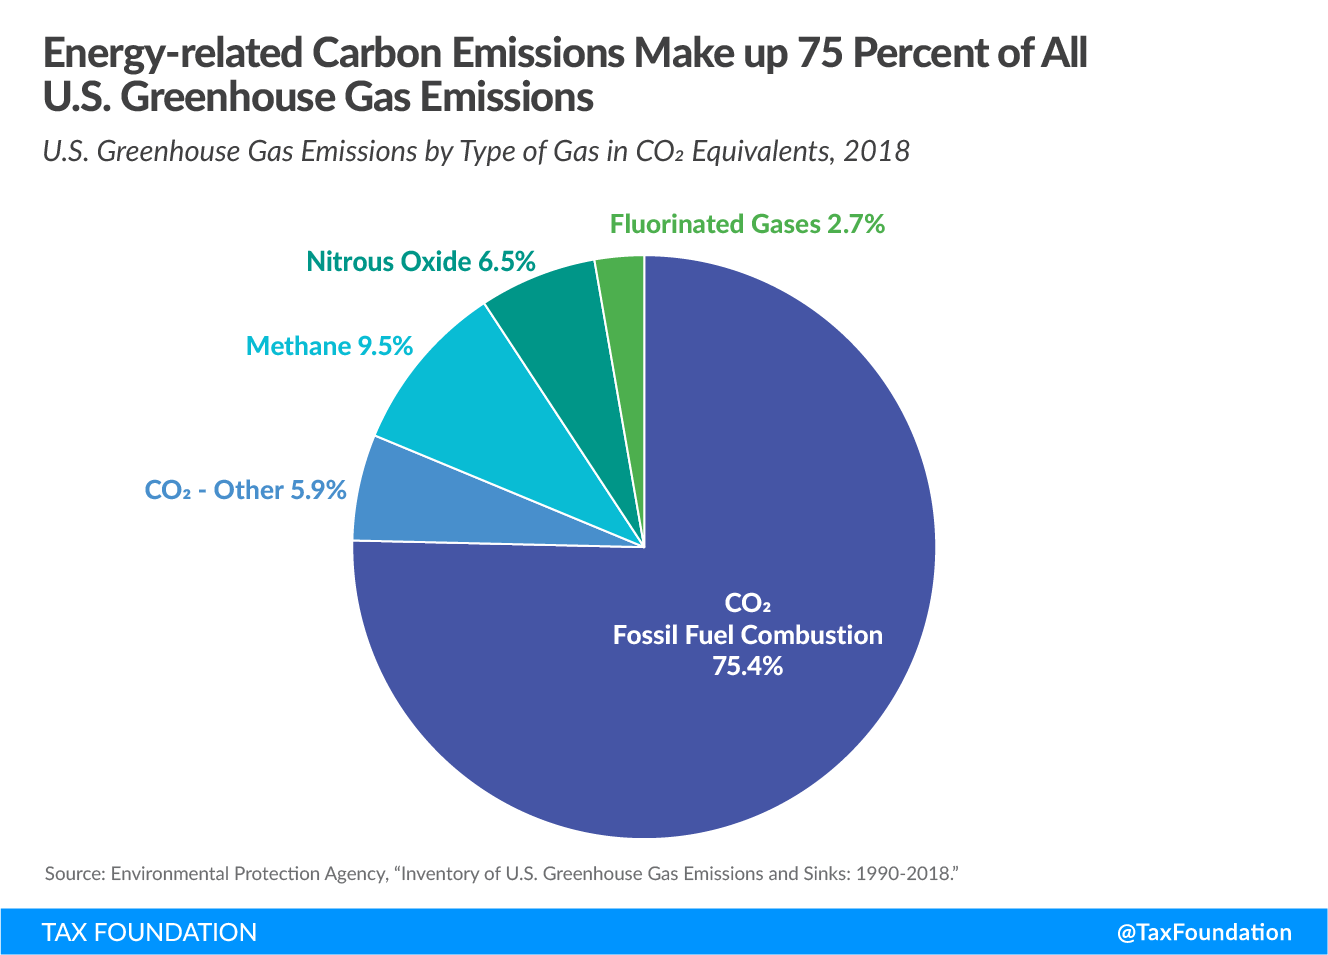 Energy-related carbon emissions make up 75 percent of all US greenhouse gas emissions